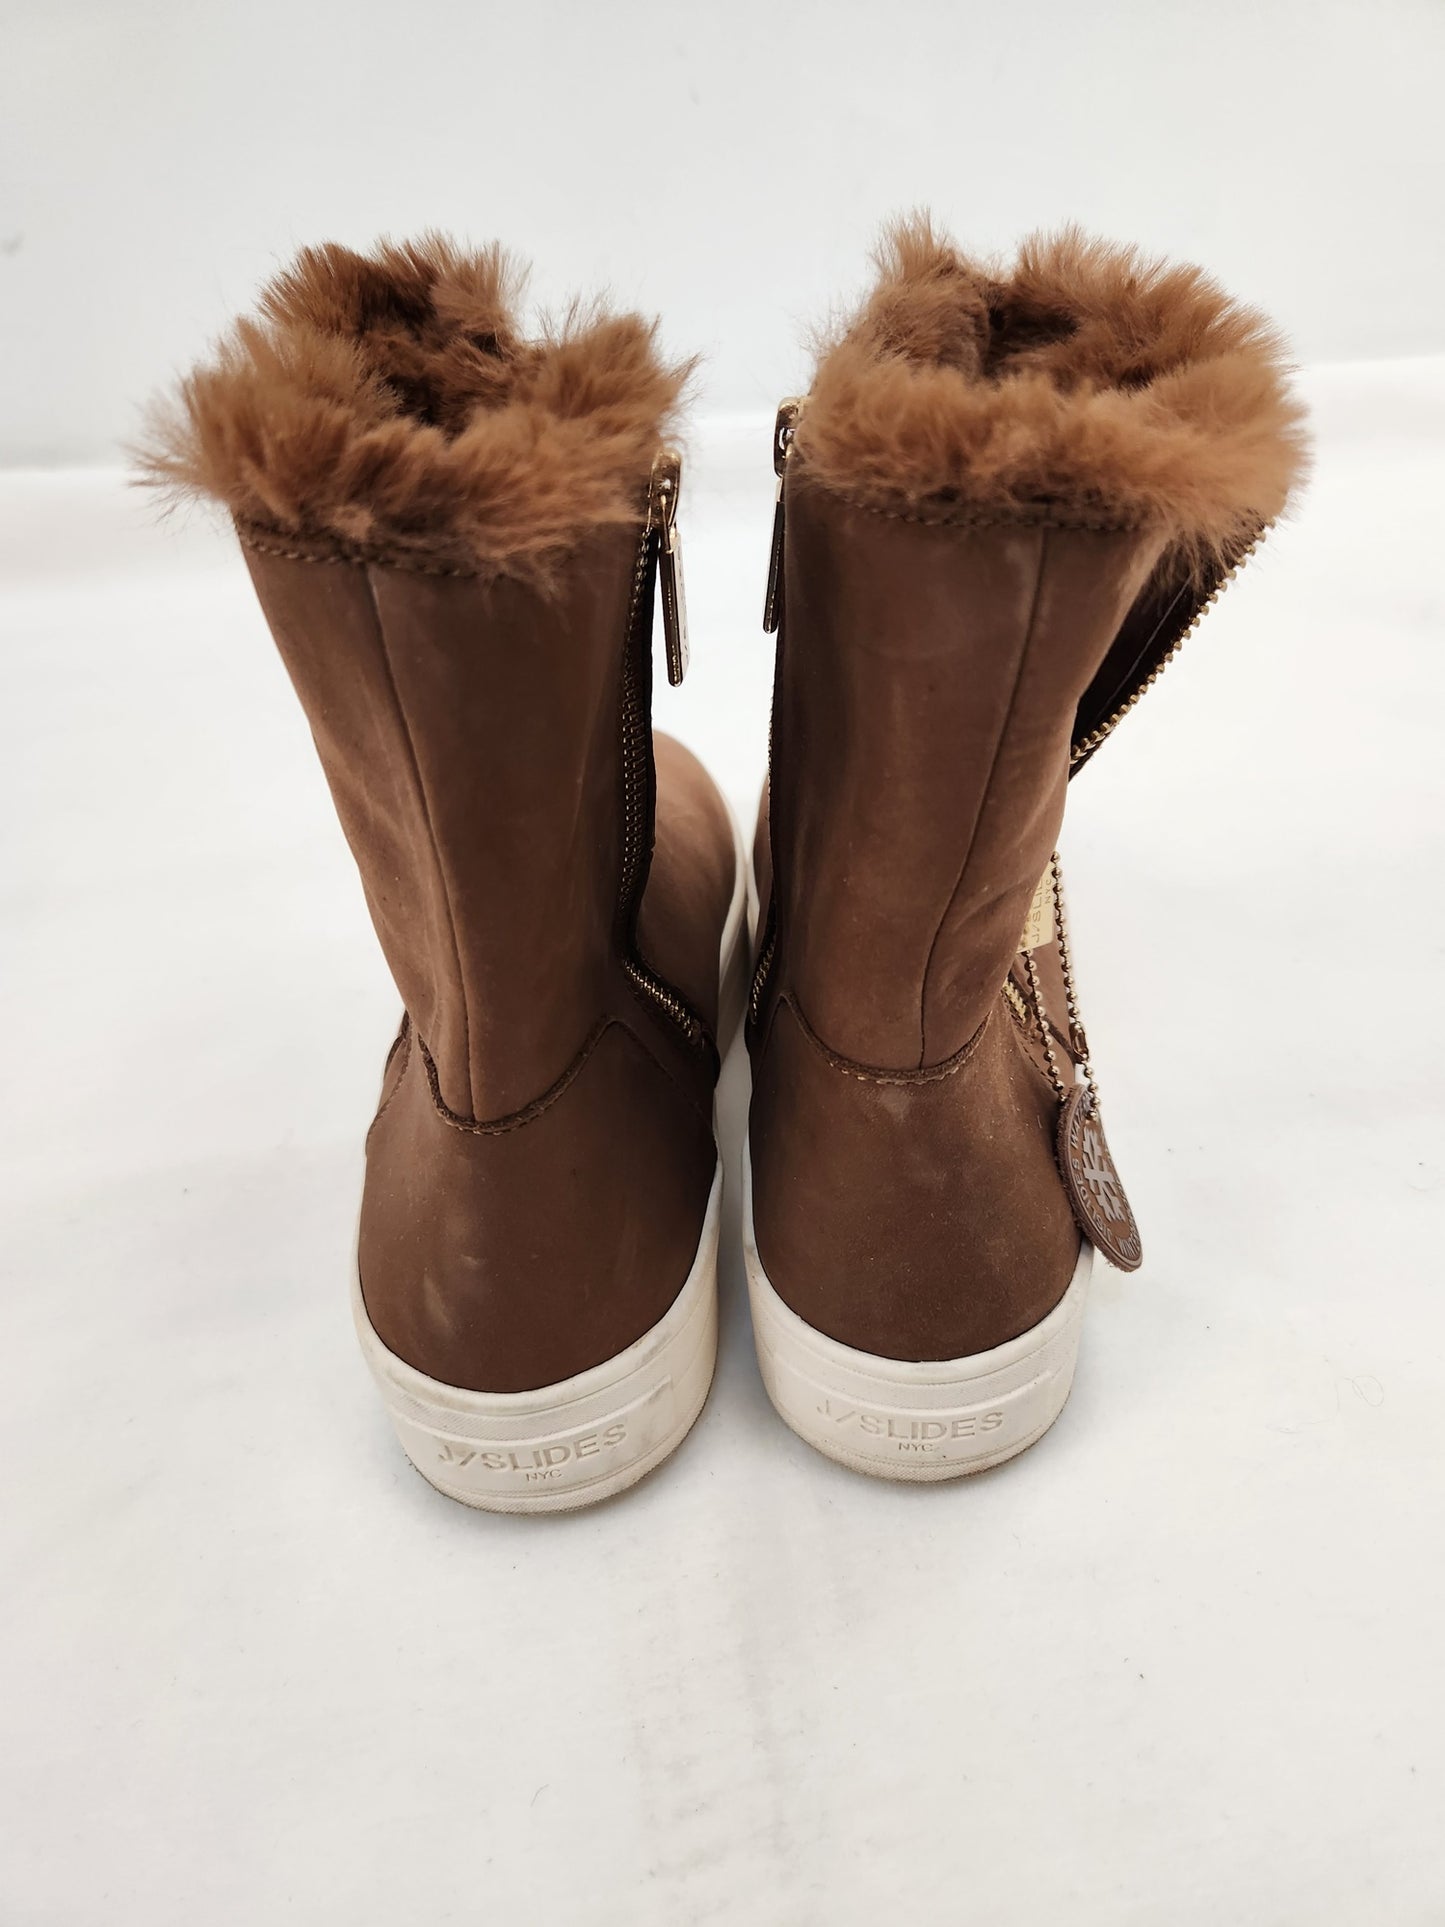 Fur Lined Suede Boots Size 10